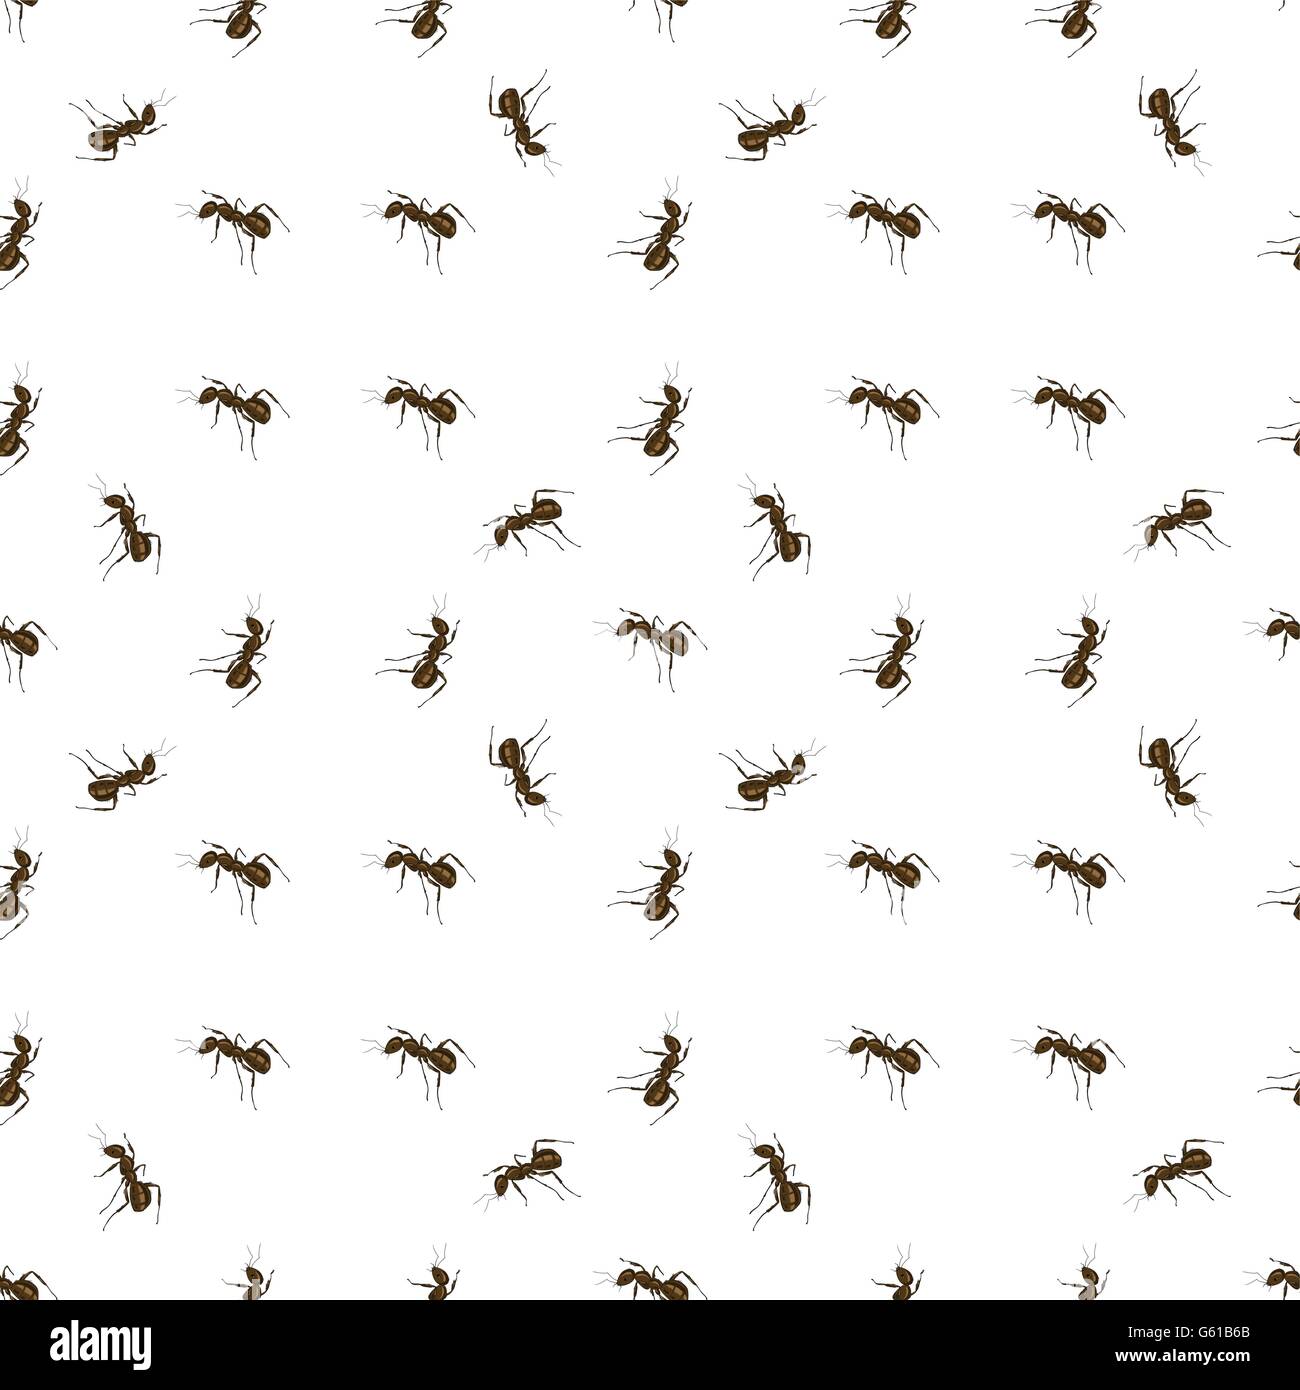 Ant Isolated on White Background. Stock Vector